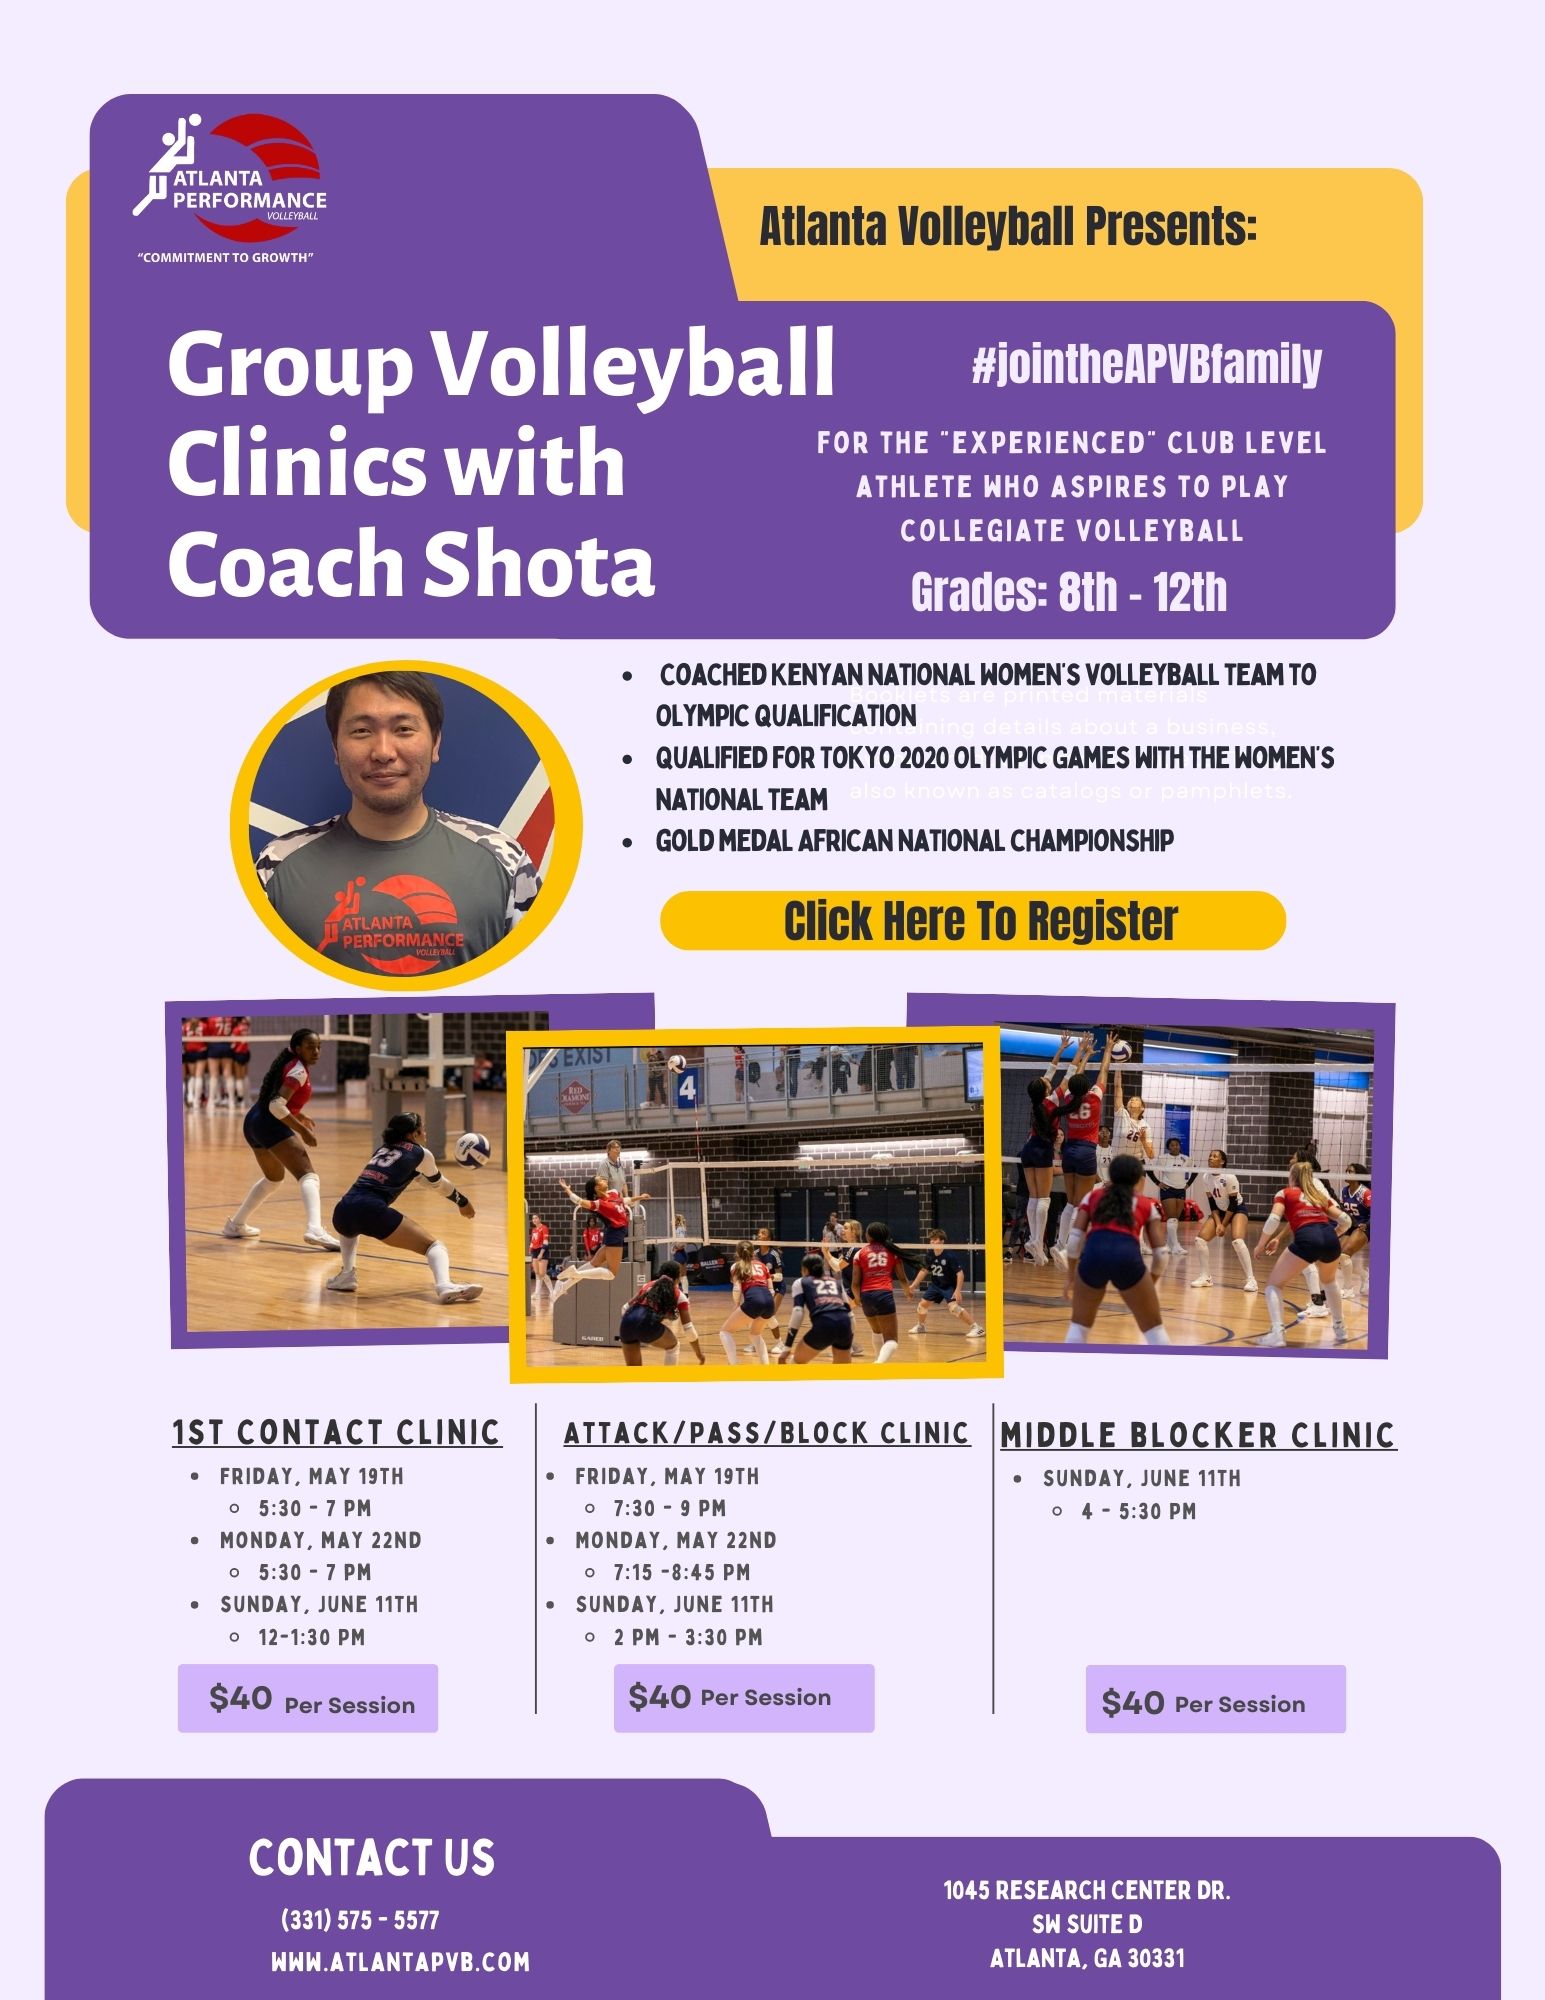 Group Volleyball Clinics